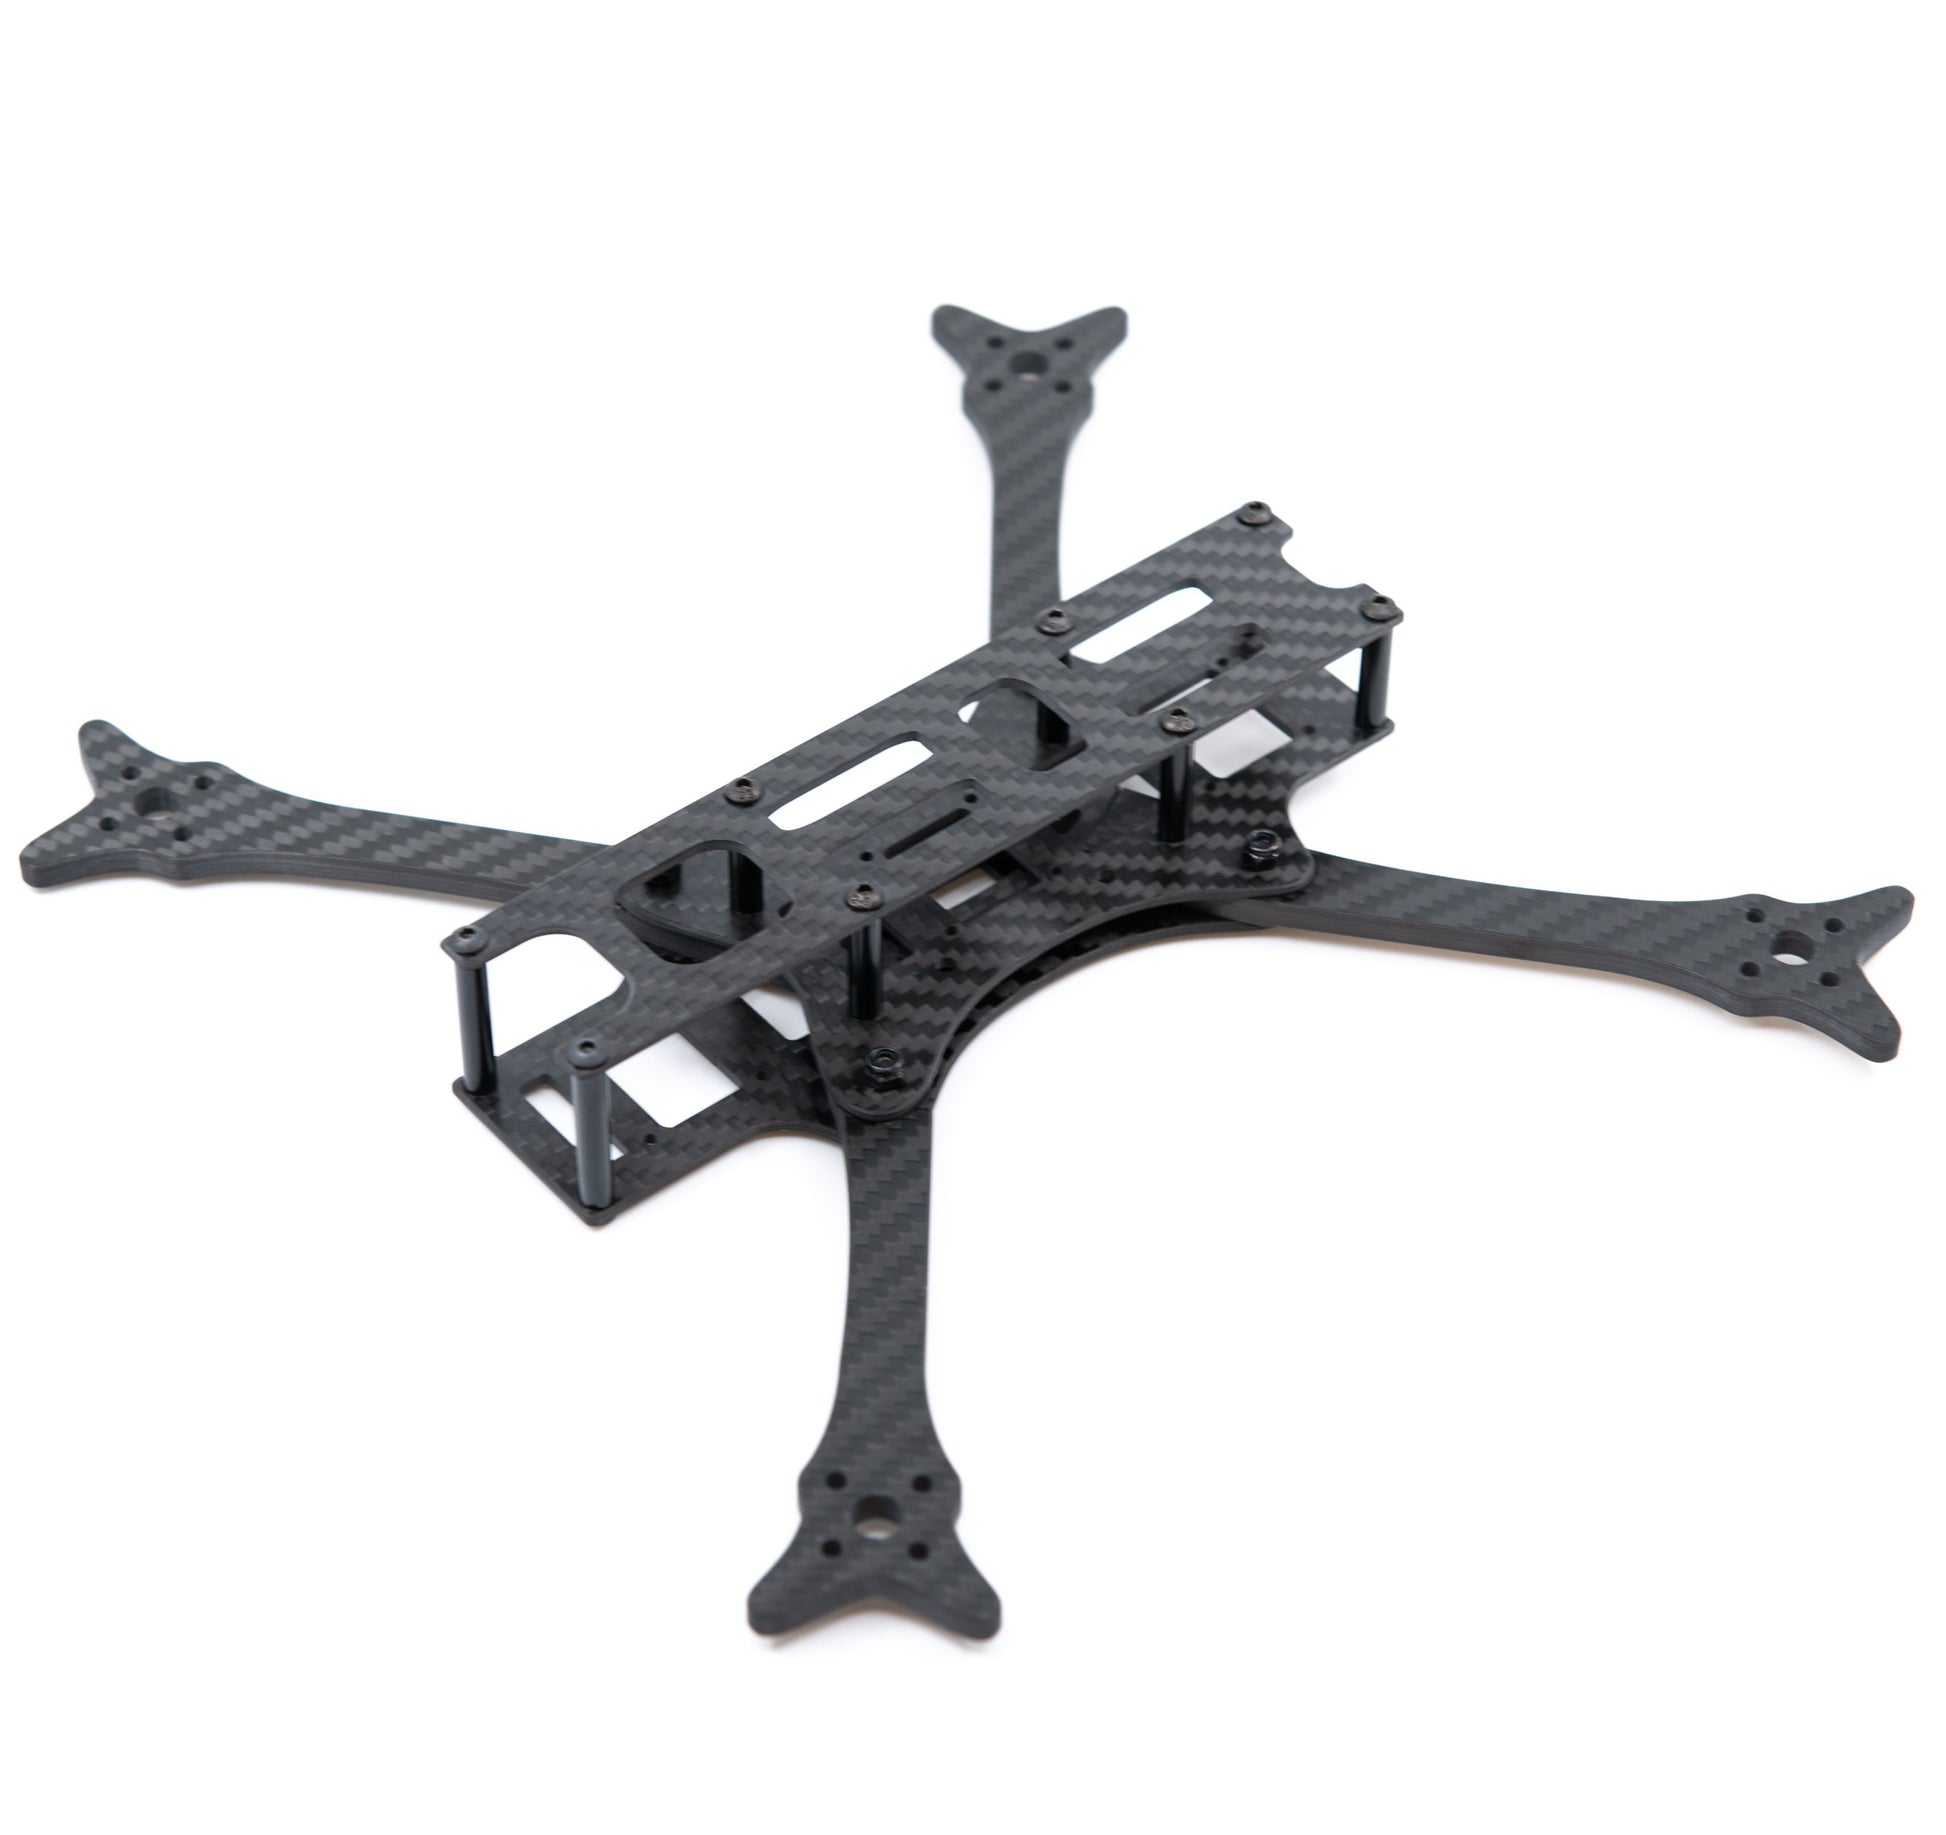 Camera Butter One Fpv Frame - New!